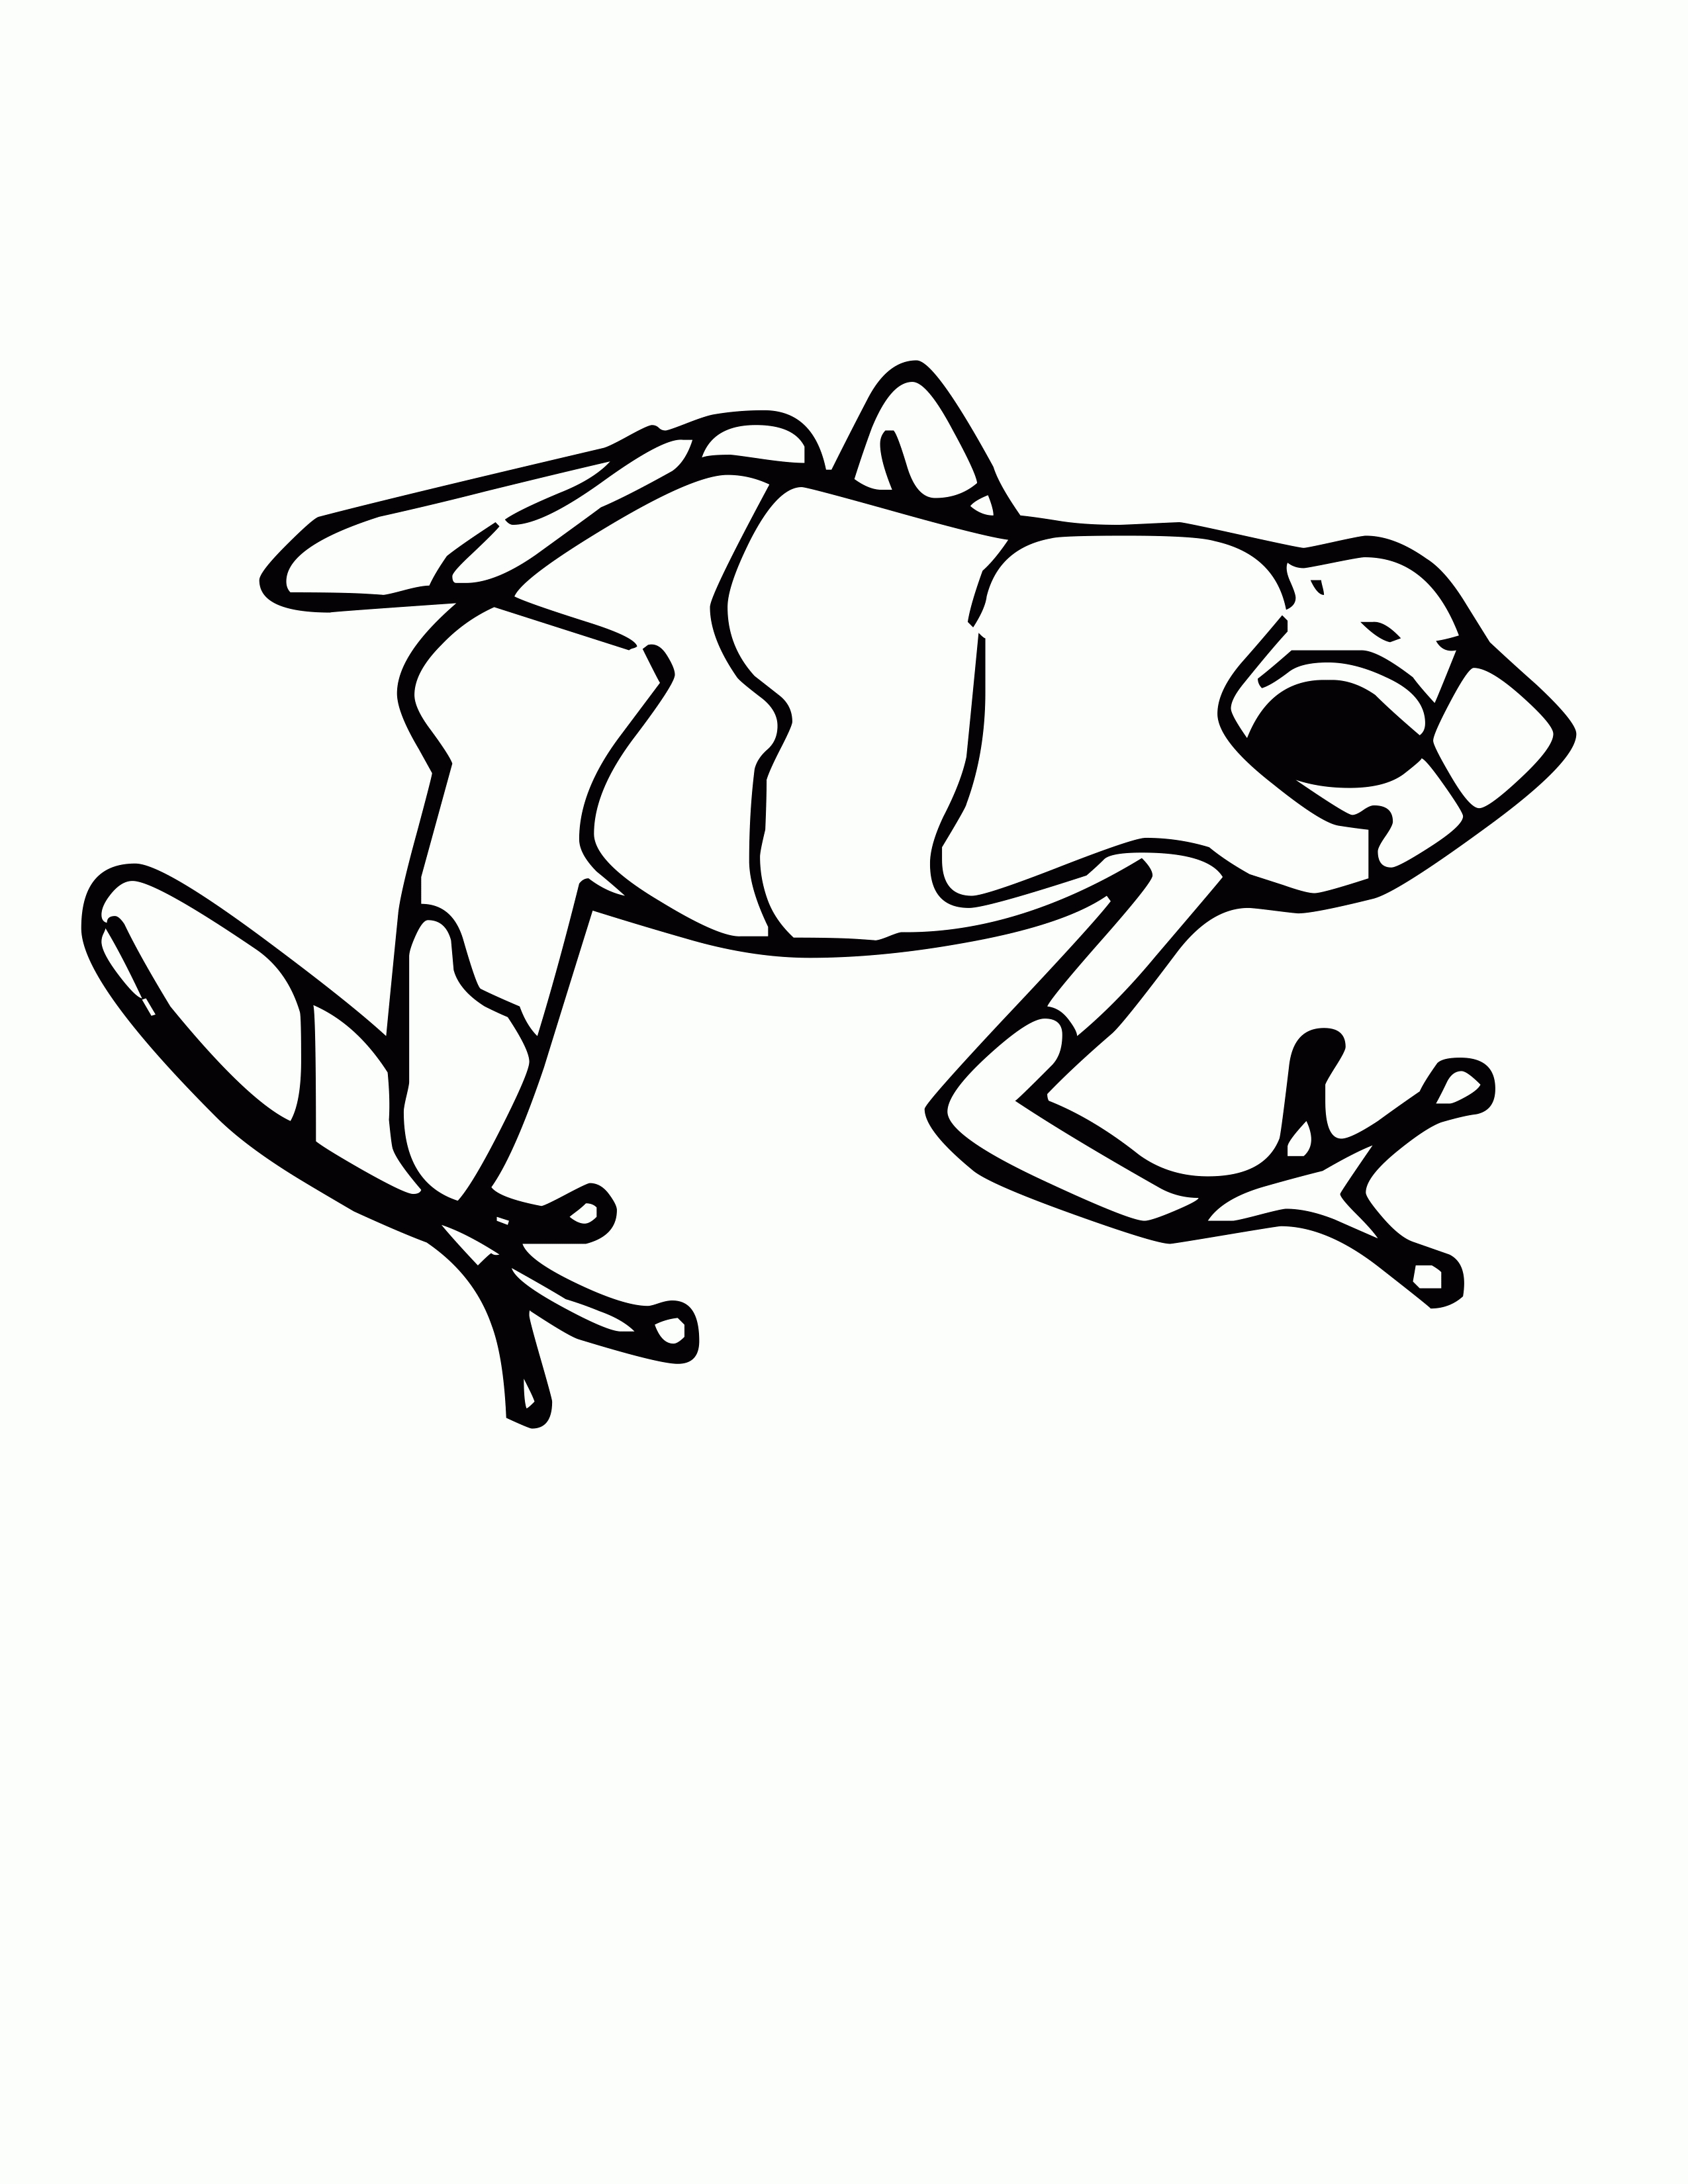 Rainforest Frog Coloring Page Tree Frog Coloring Pages Free Download Best Tree Frog Coloring